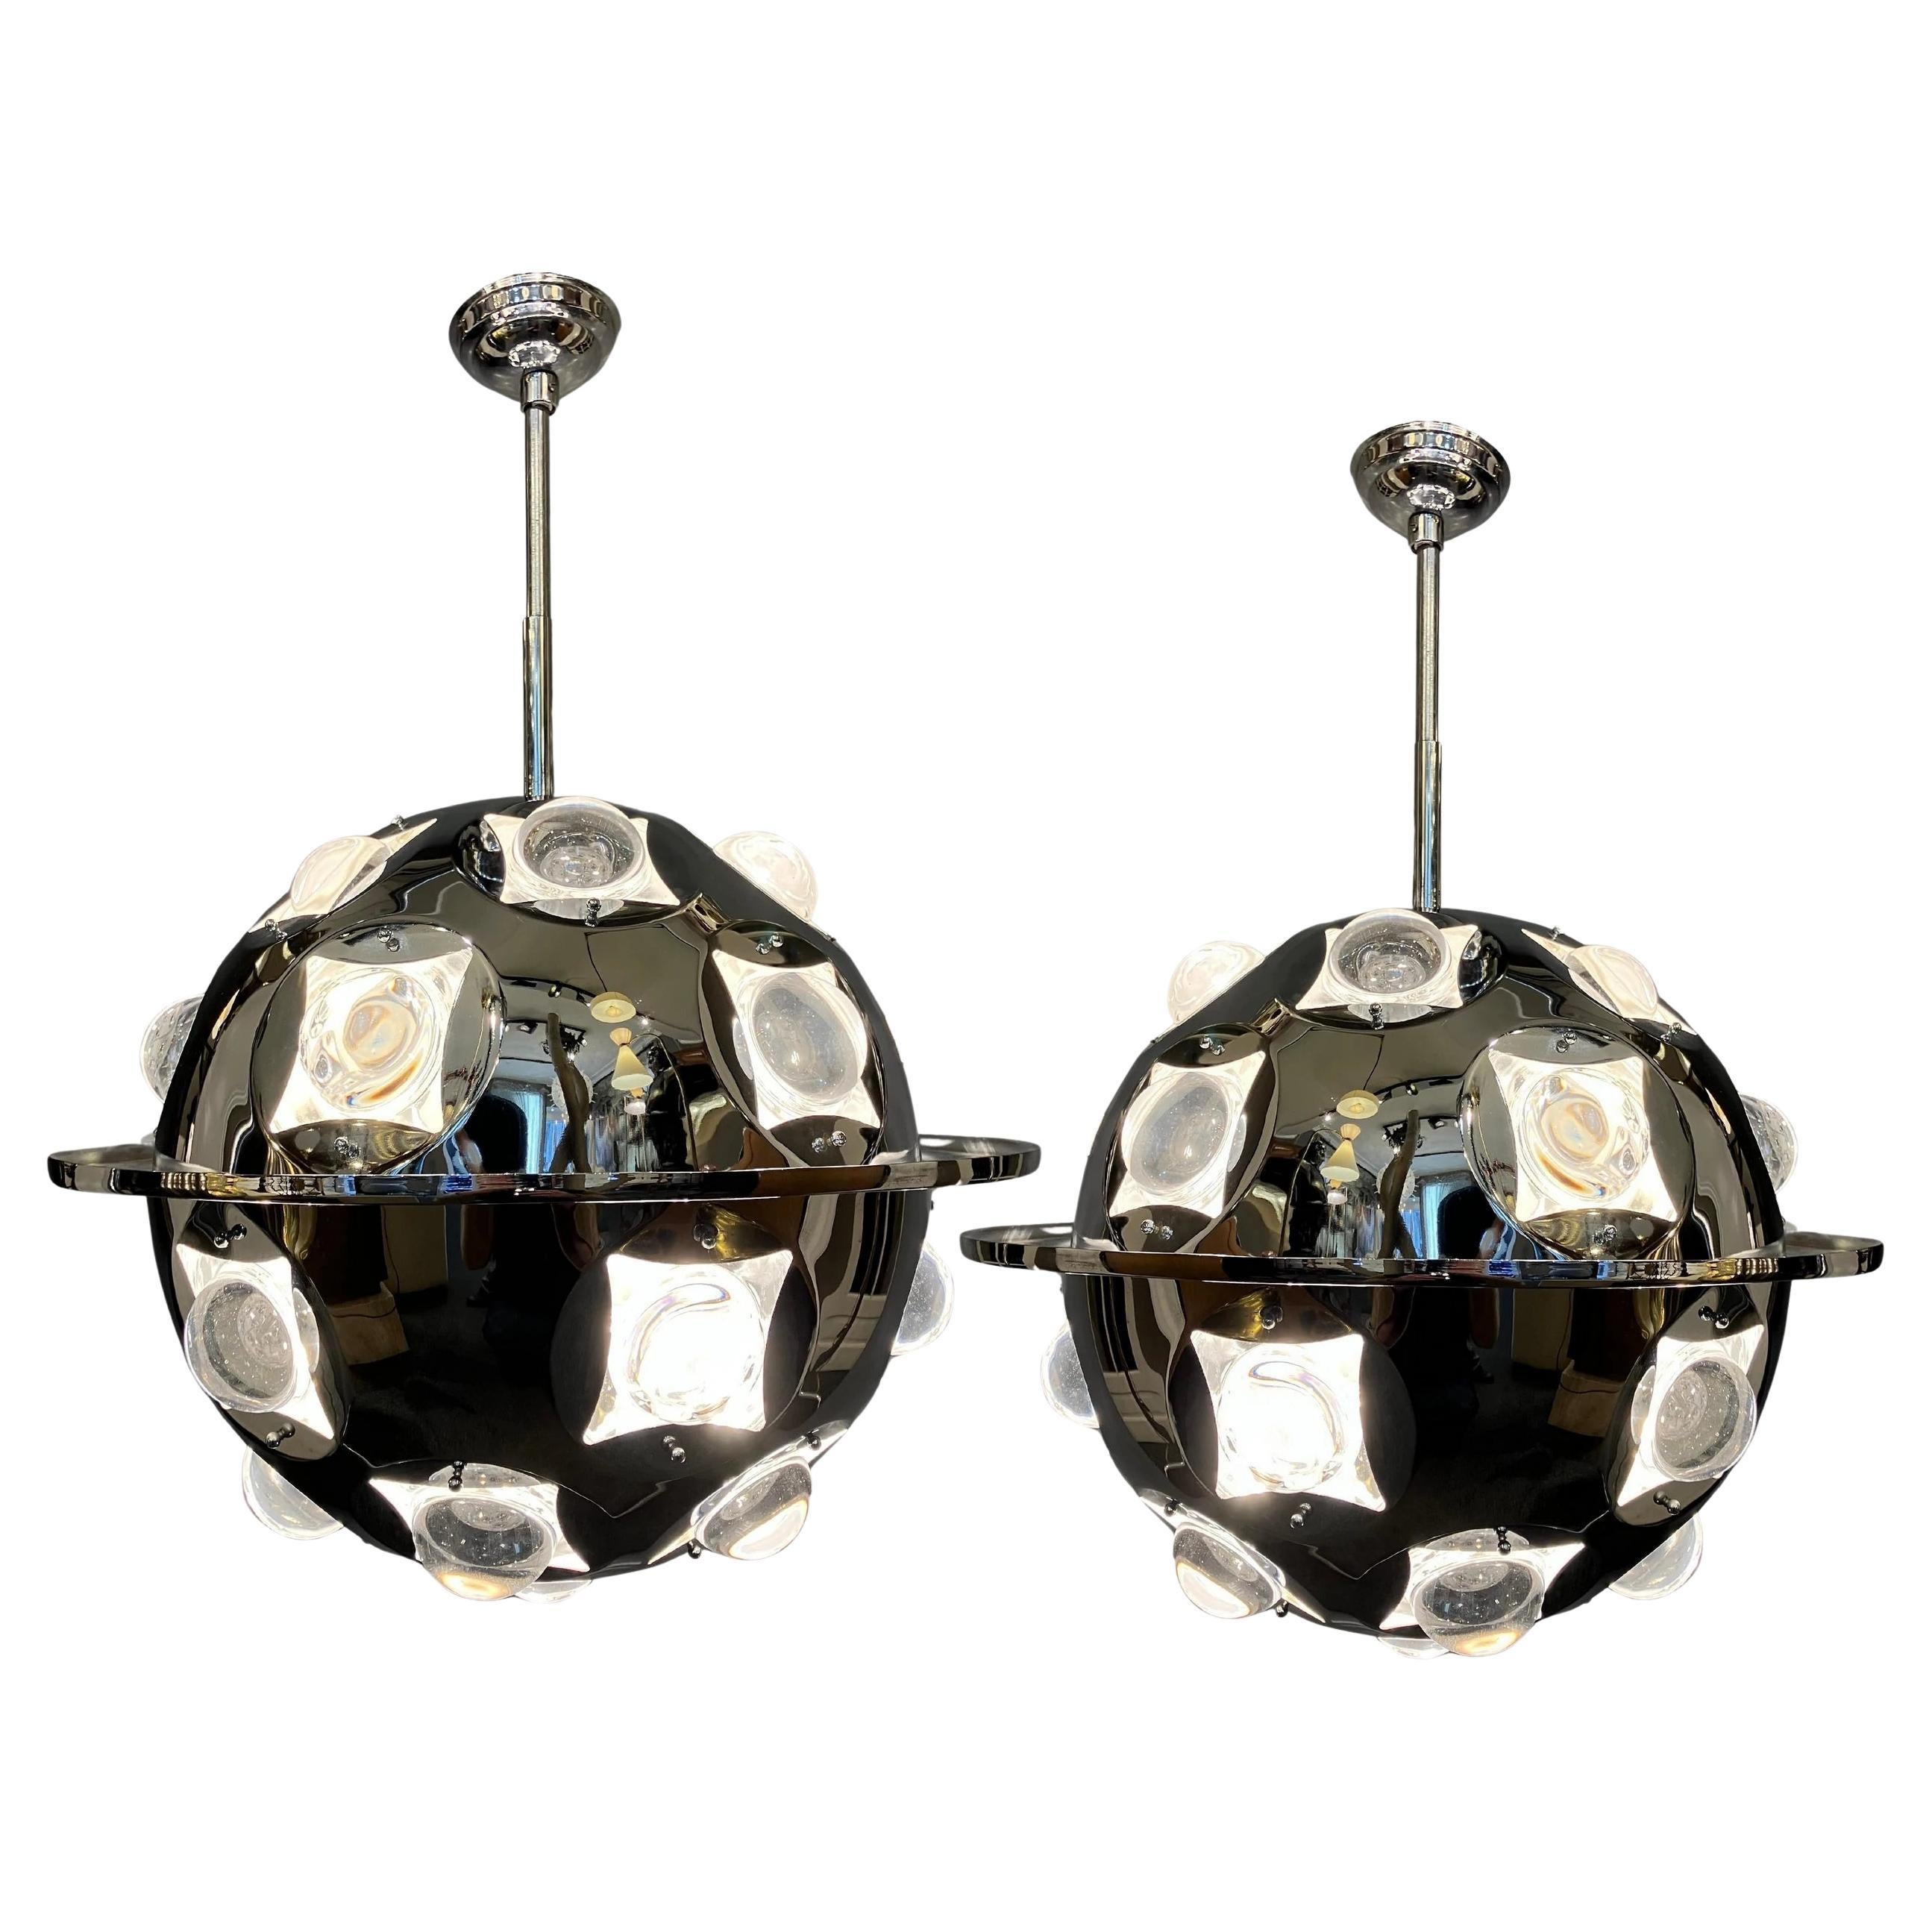 Pair of Sputnik chandeliers, attributed to Oscar Torlasco, Editions Lumi, Italy  For Sale